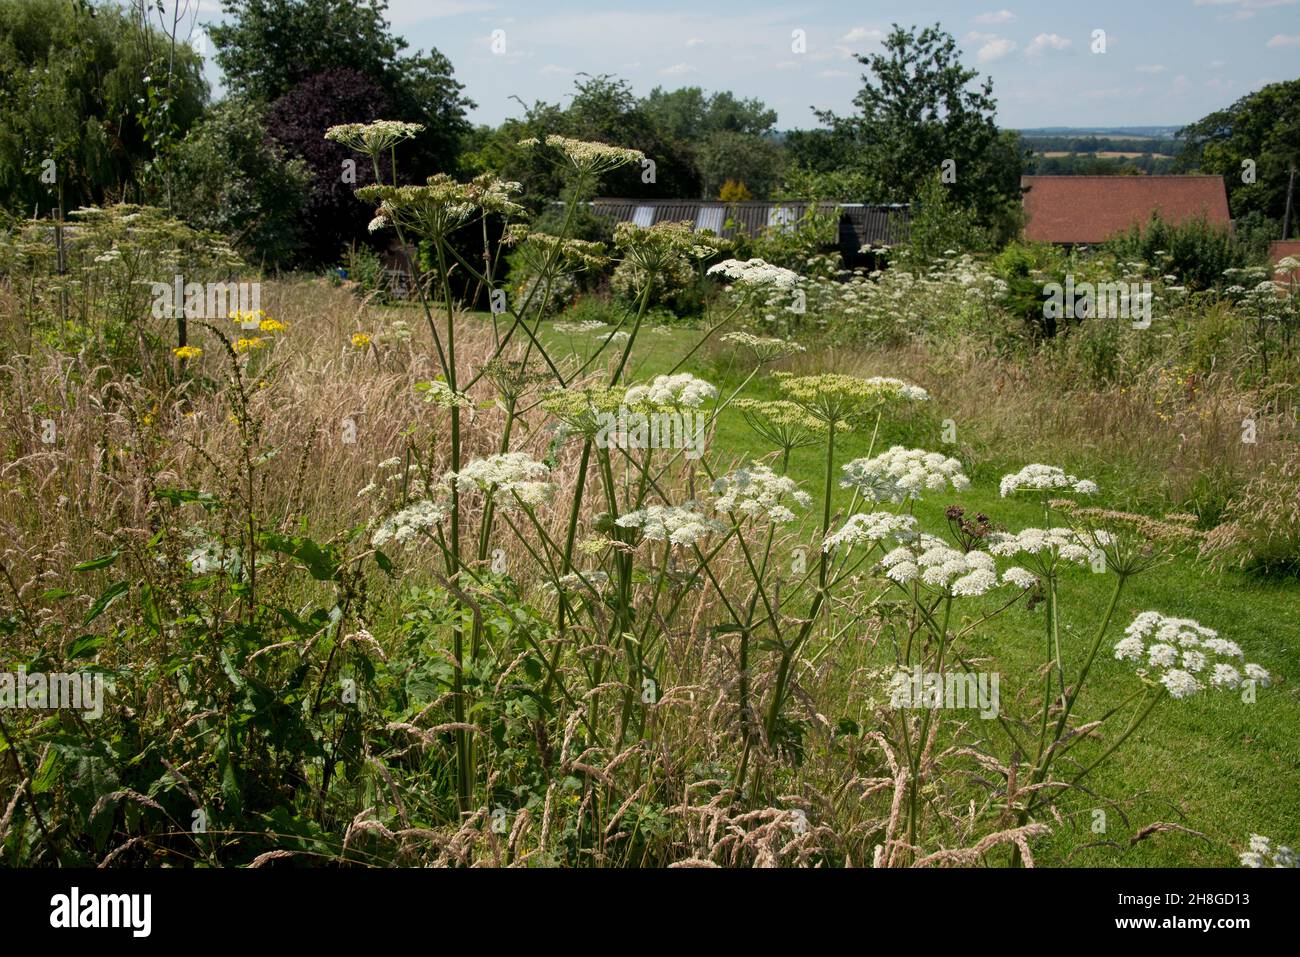 Wild garden with mown pathways between blocks of long grass planted with wildflowers and small trees to encourage wildlife and pollinators, Berkshire, Stock Photo